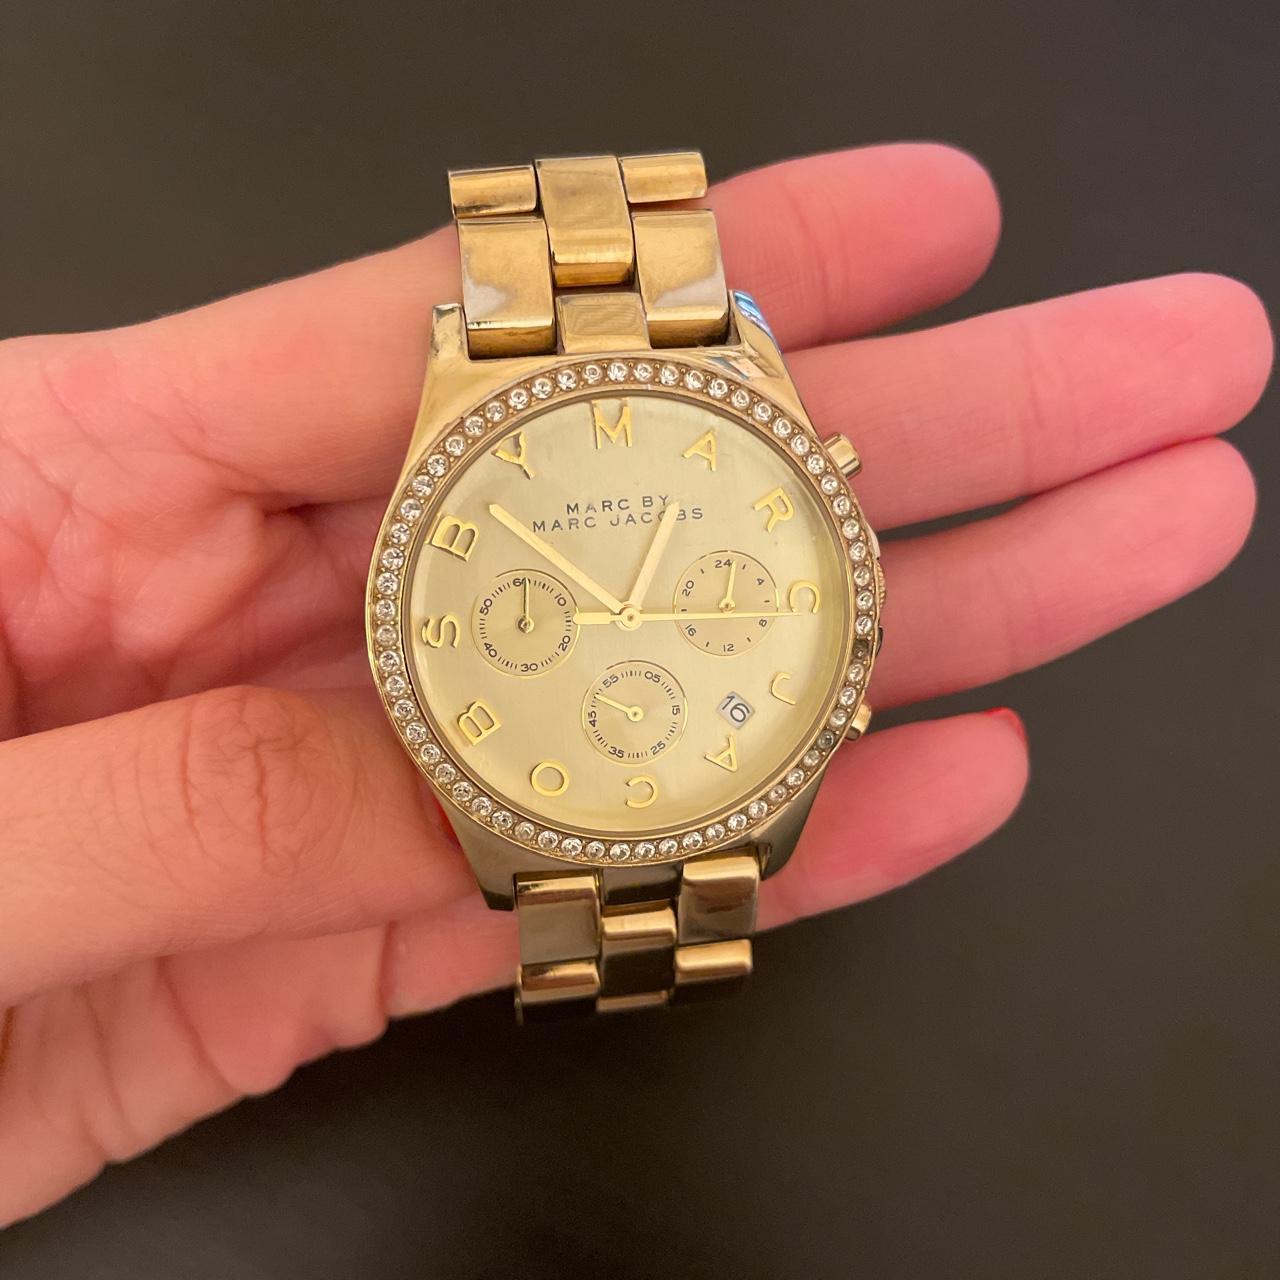 Marc by Marc Jacobs Women's Gold Watch